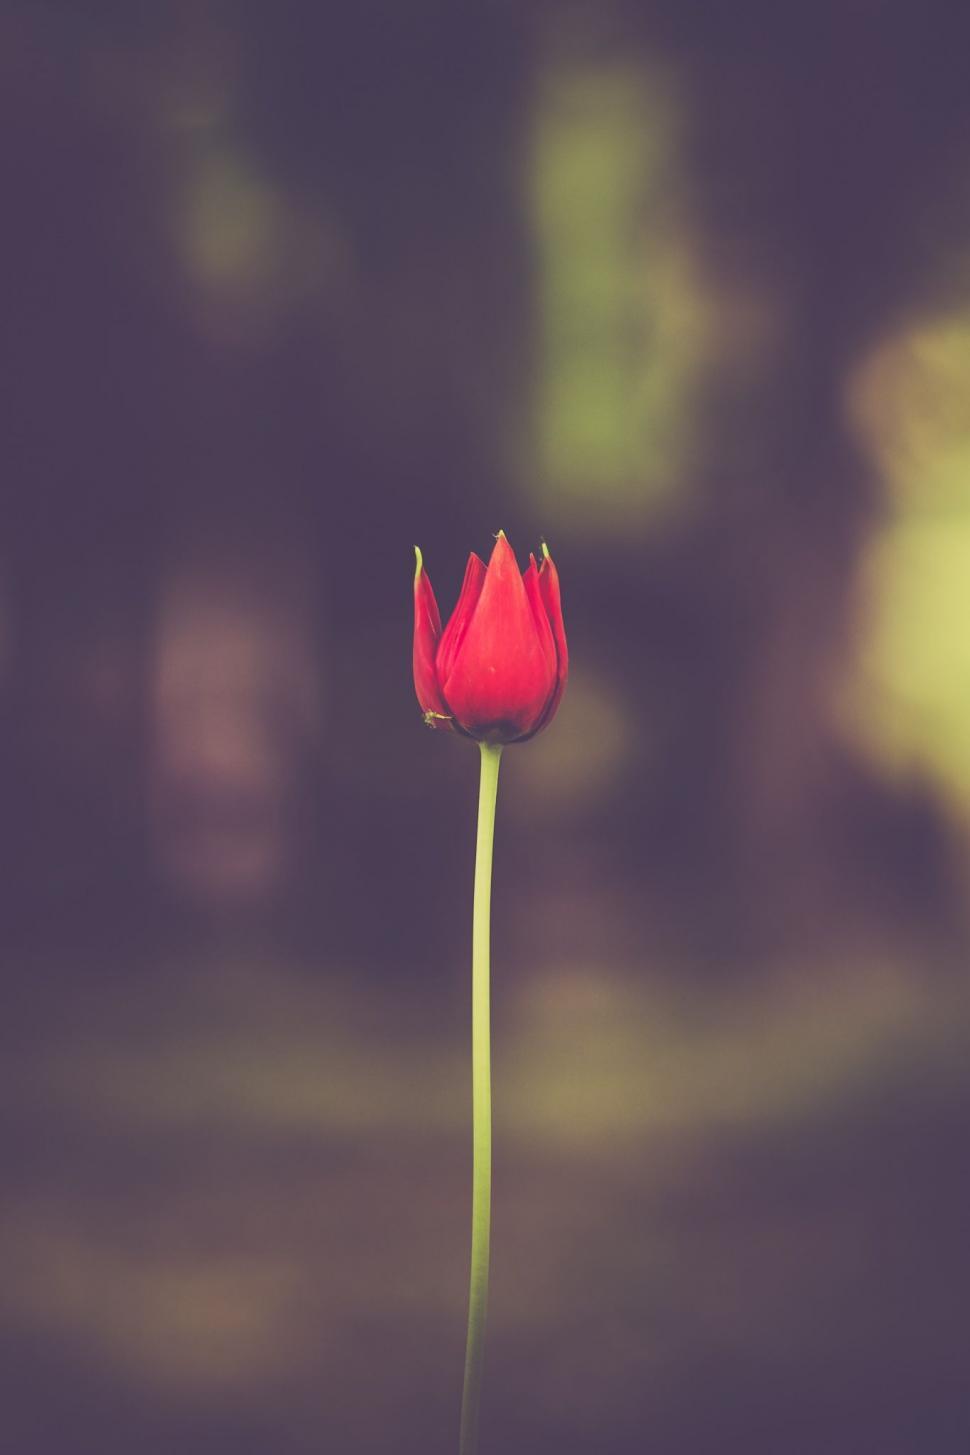 Free Image of A Single Red Flower on a Table 